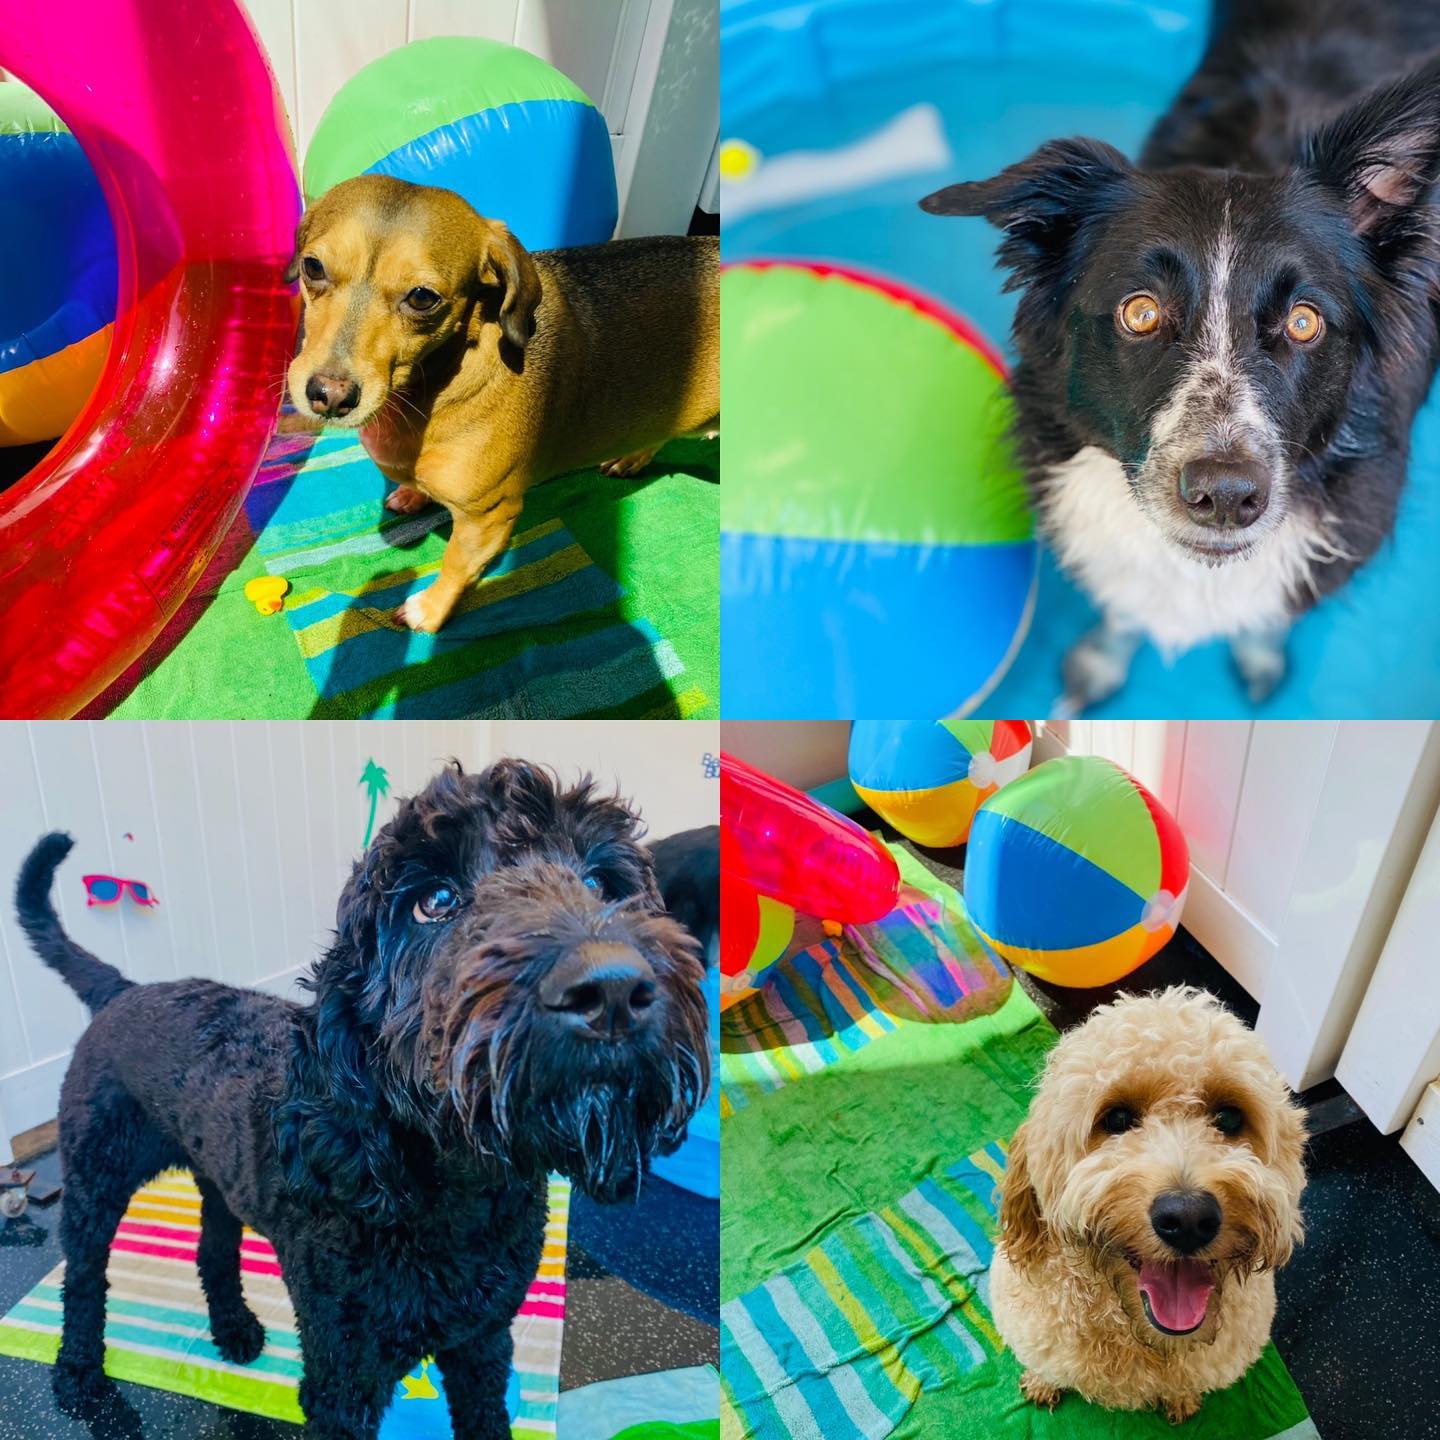 City Paws Pet Club - Dog Daycare, Boarding, Training & Grooming